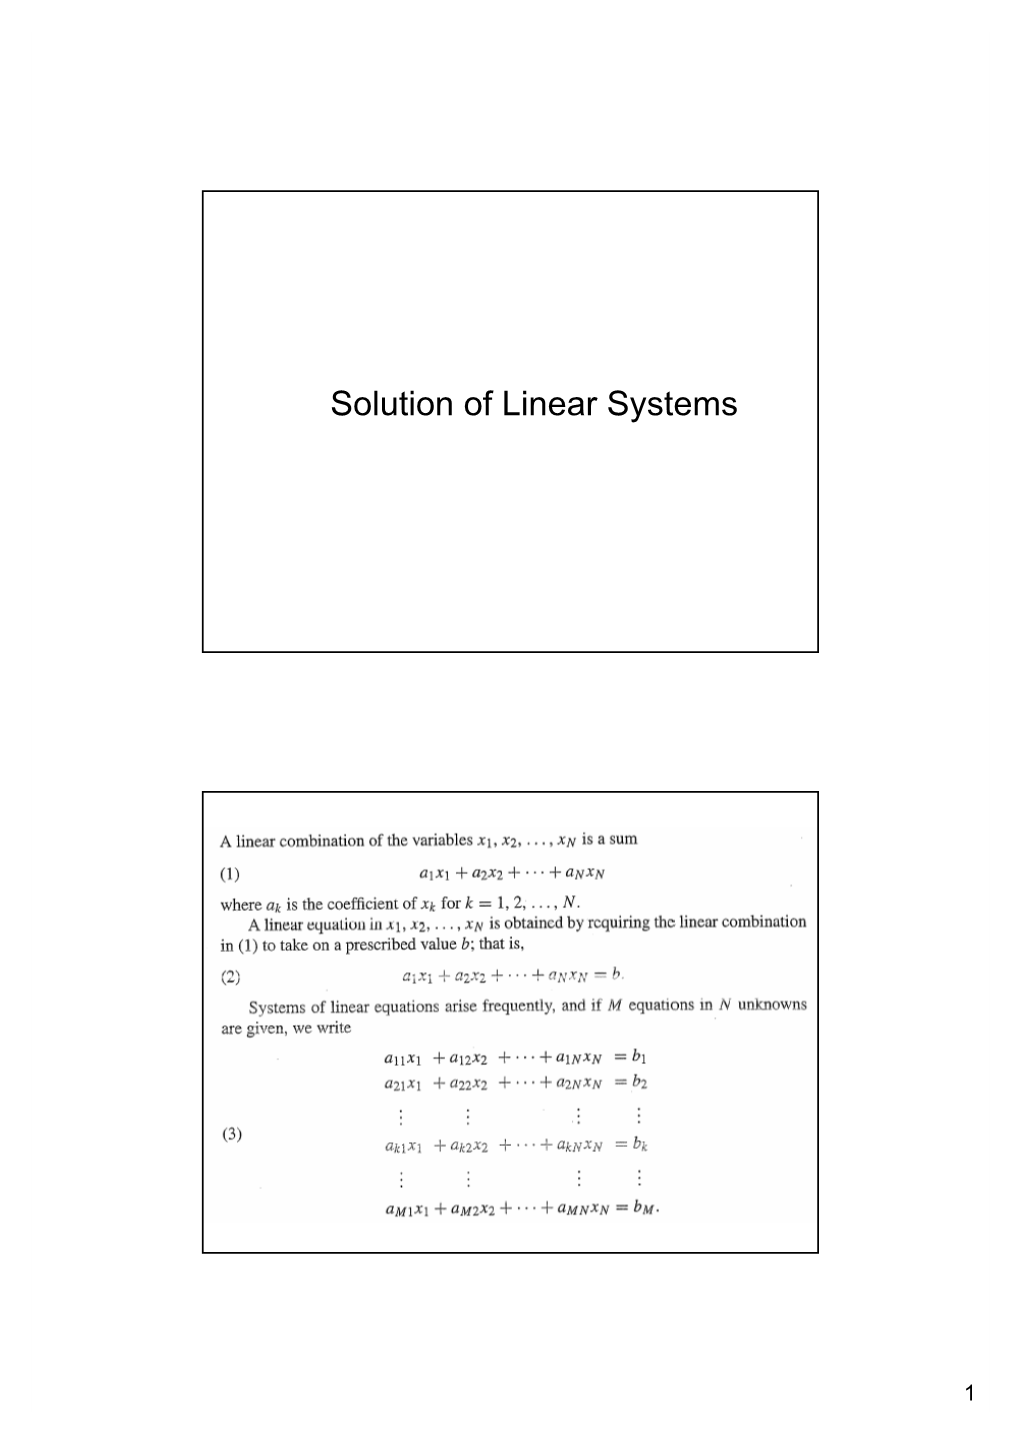 Solution of Linear Systems